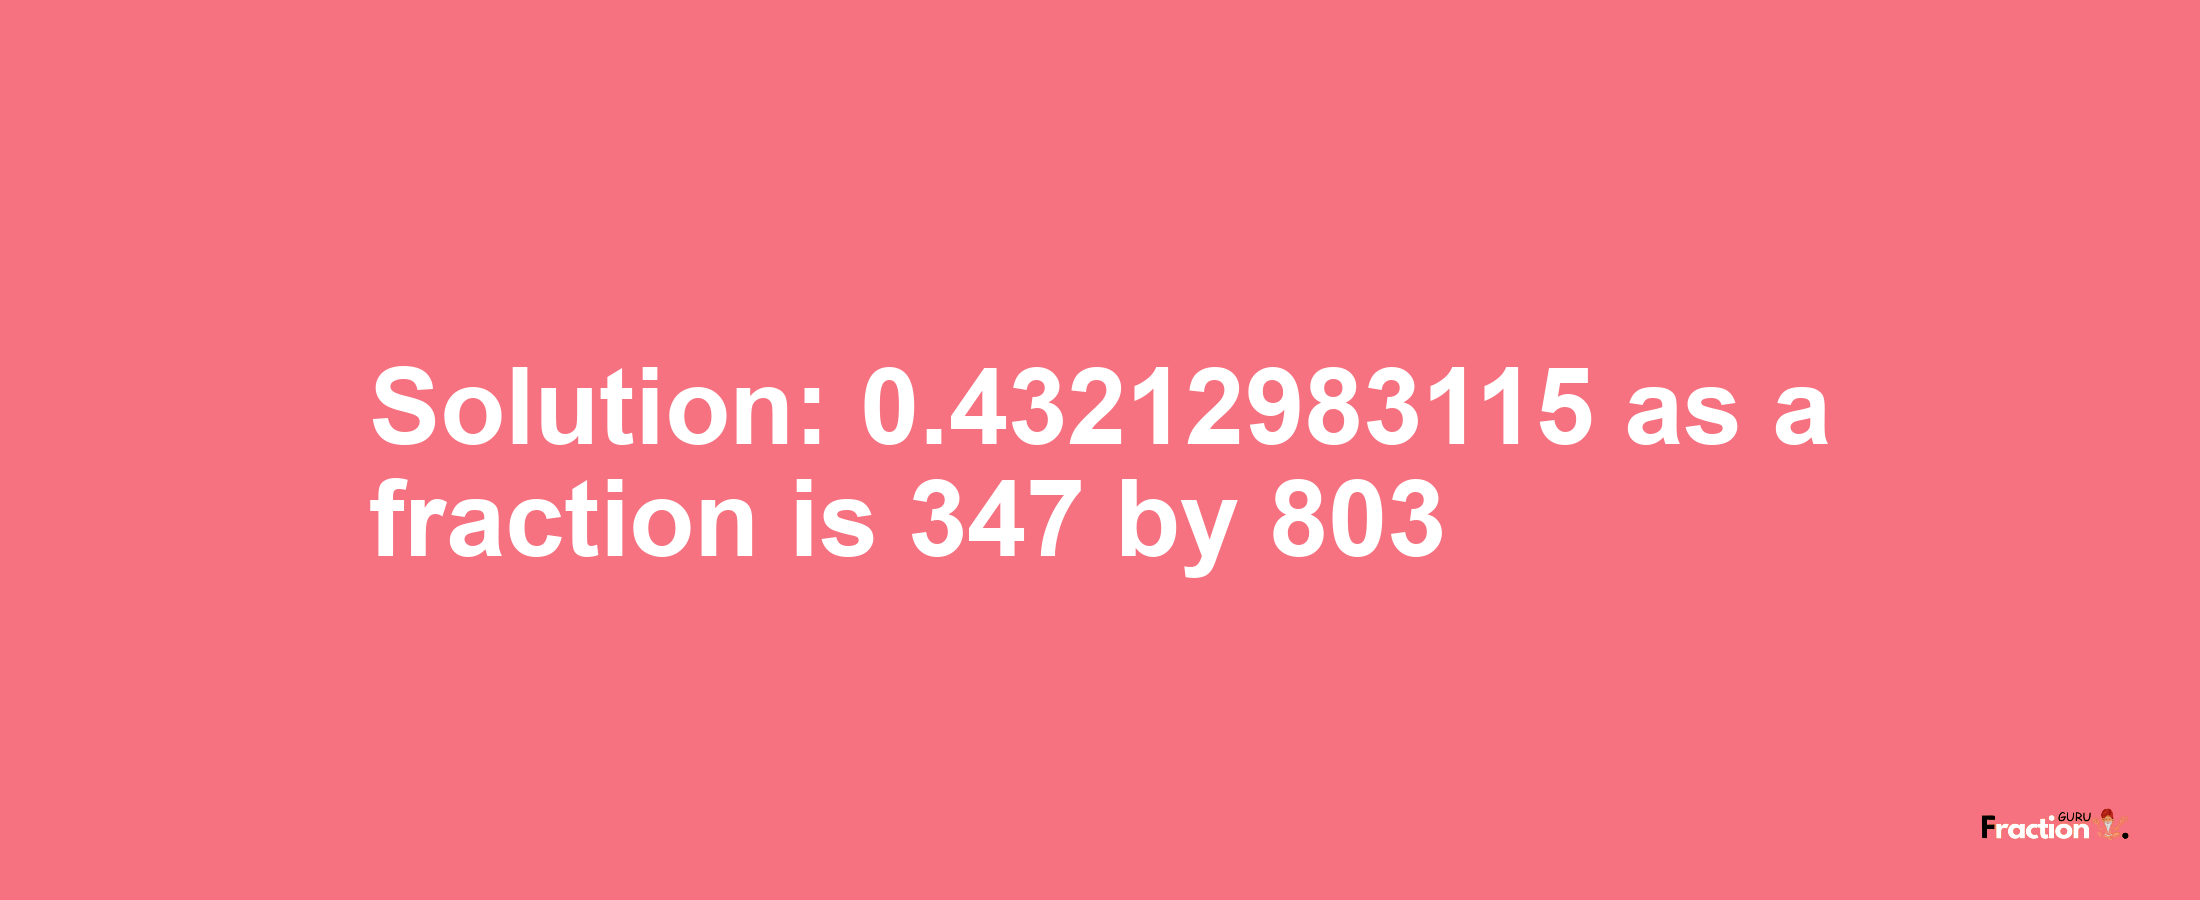 Solution:0.43212983115 as a fraction is 347/803